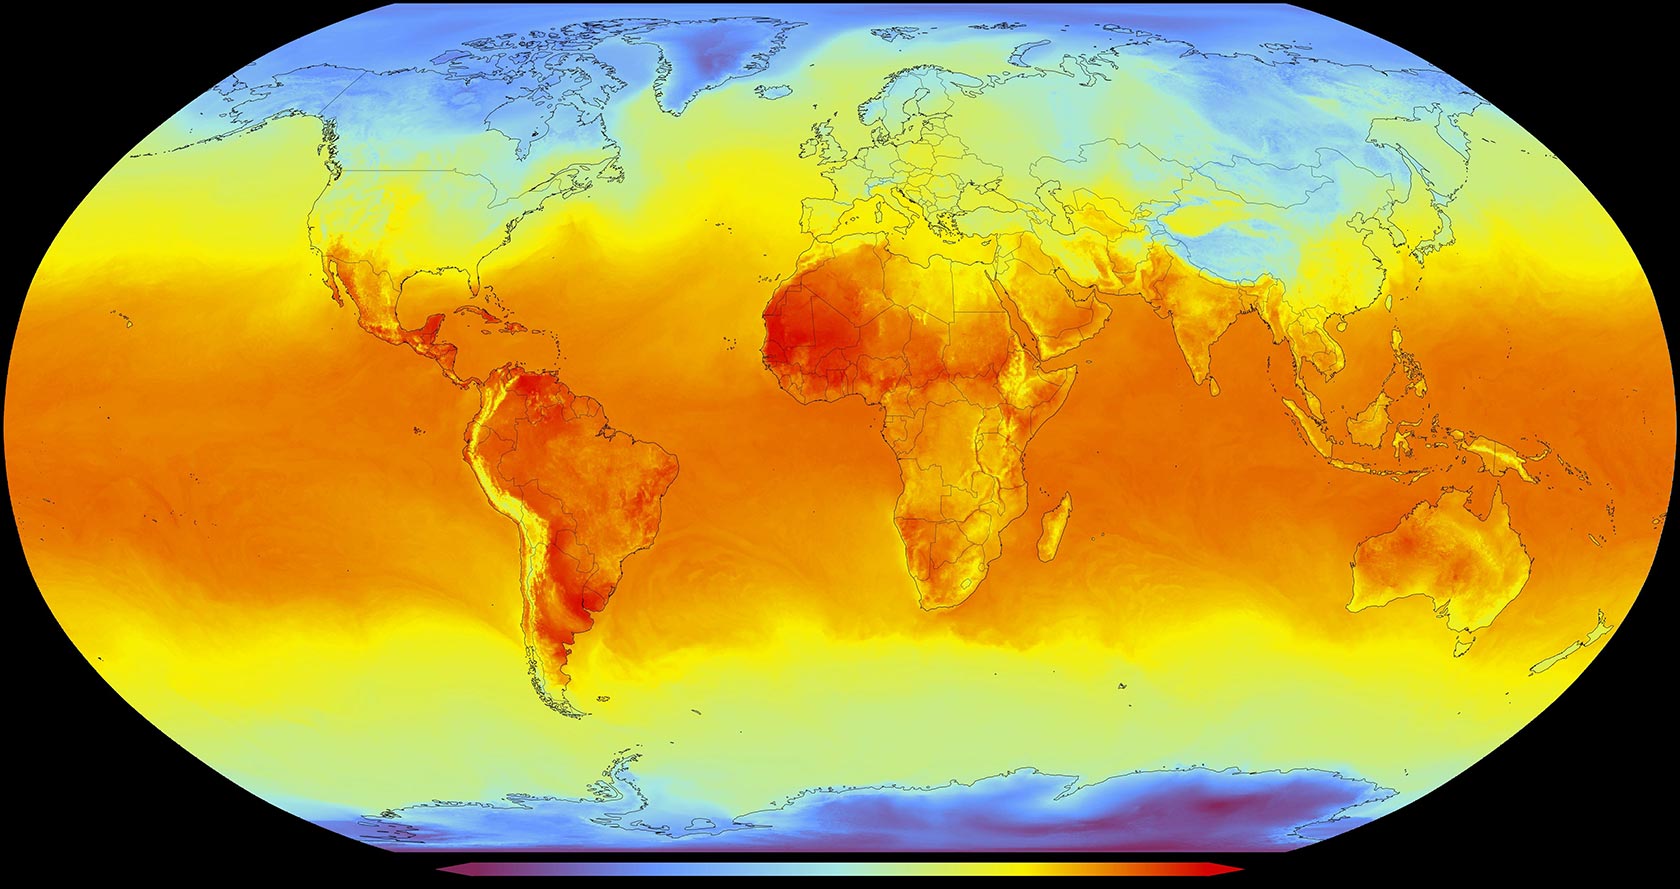 A map of the Earth showing a heat map of the geographic areas close to the equator that receive the most sunlight.